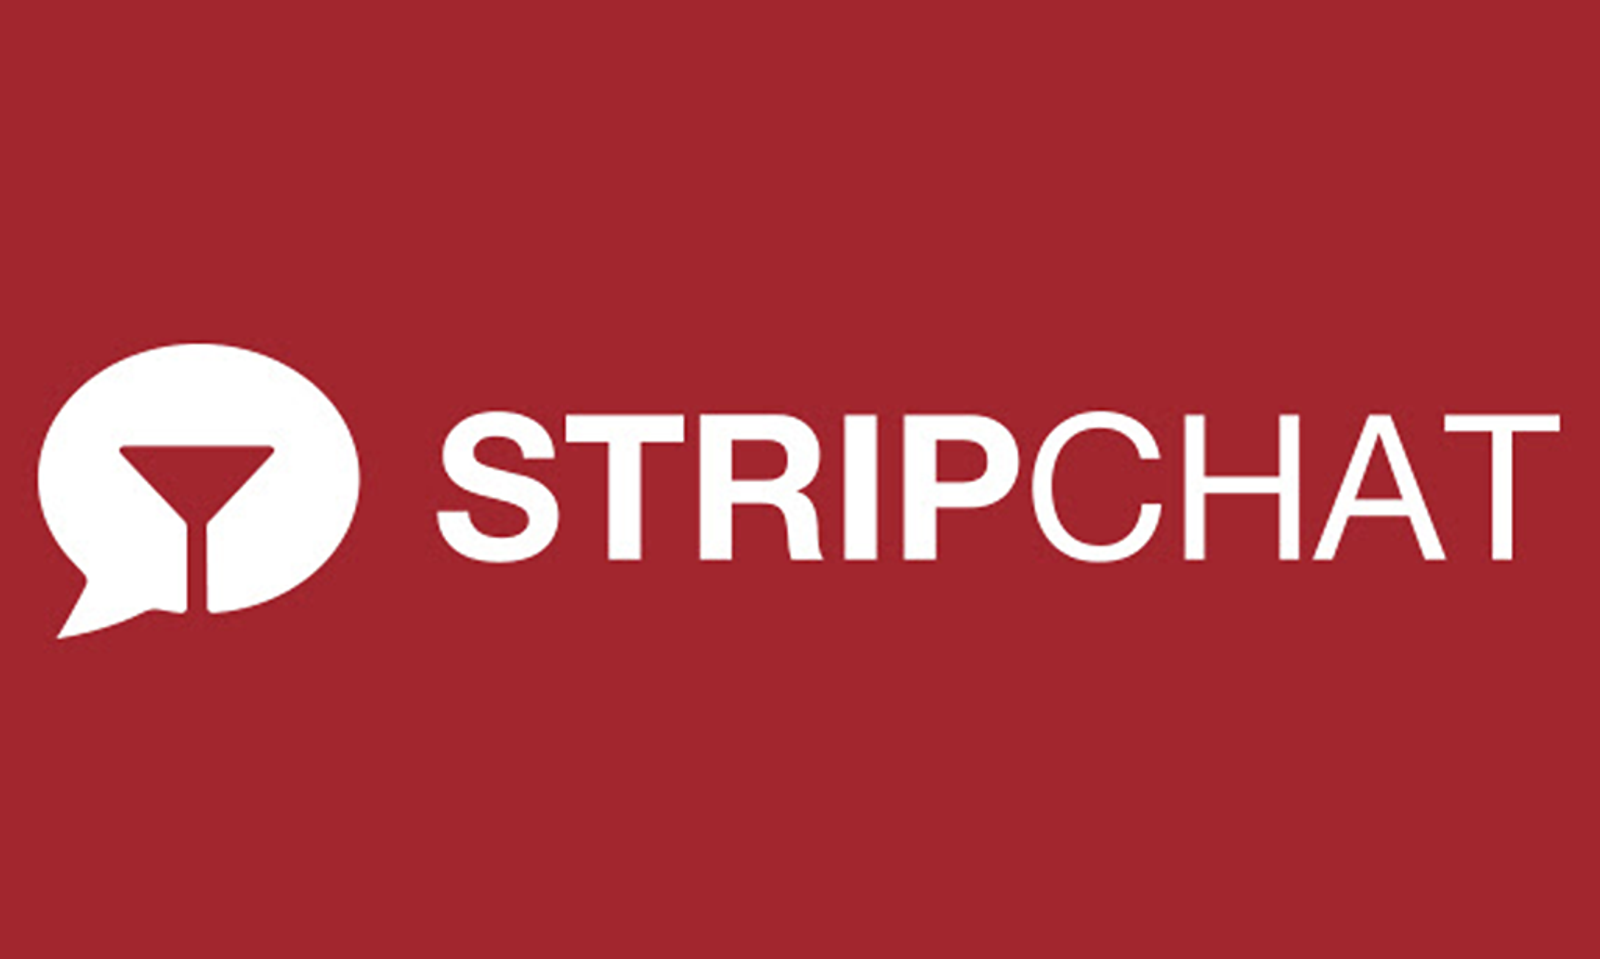 Stripchat Wins ‘Best International Cam Site’ at 2019 LALExpo